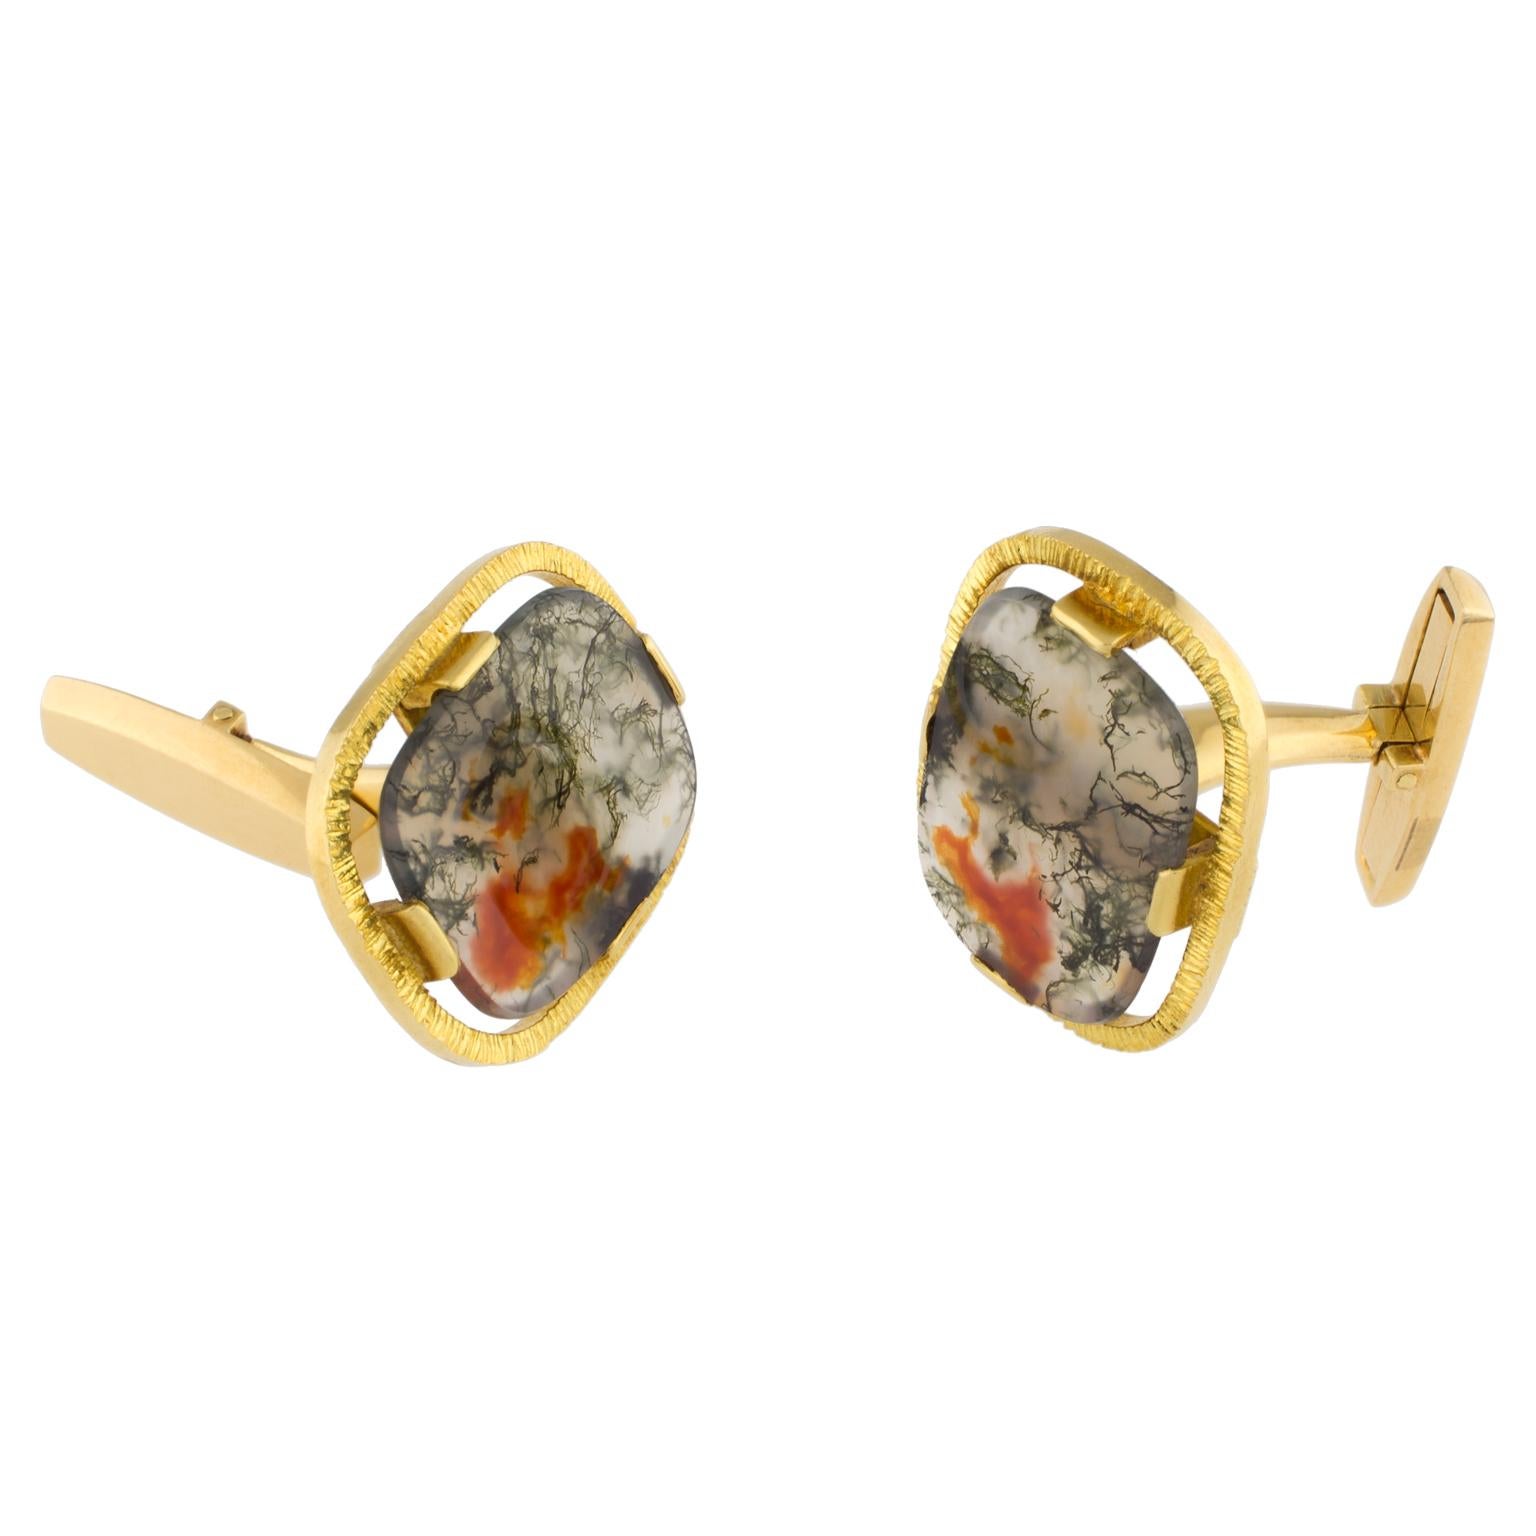 Vintage gold cufflinks centered by two moss agates.
Dimensions: 25 x 18 mm (0.98 x 0.71 in)